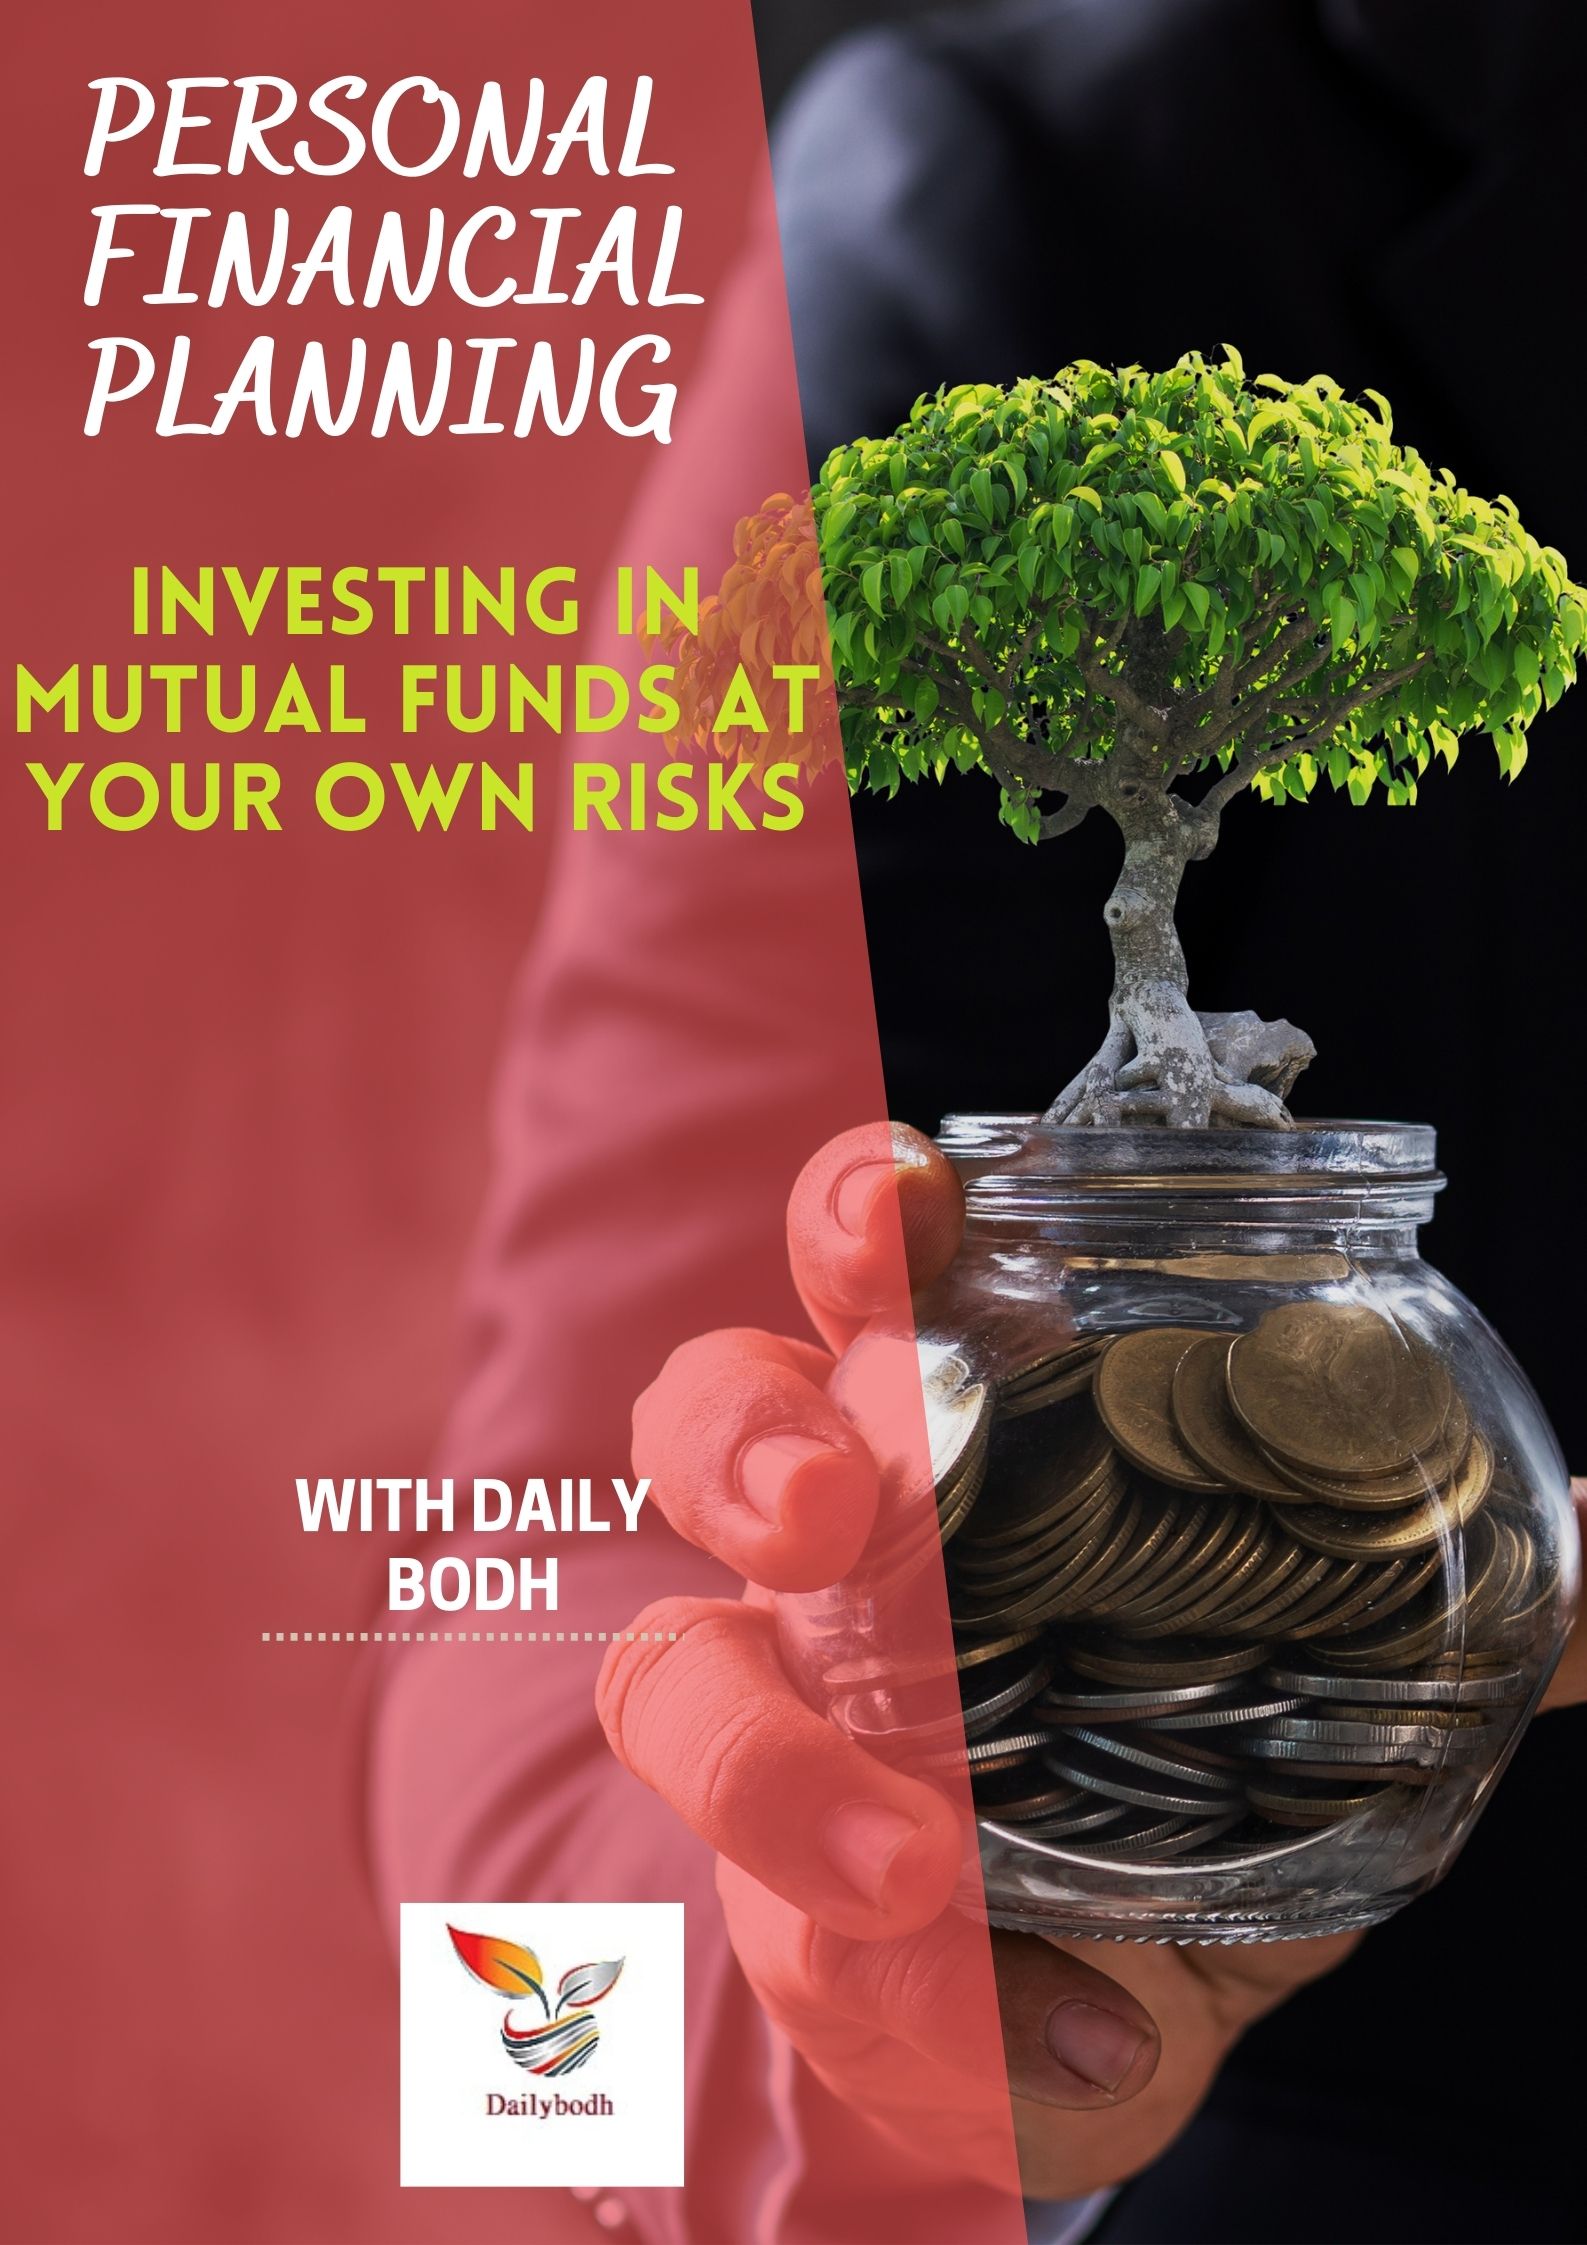 Investing in Mutual Funds at your own risks (Personal Financial Planning)